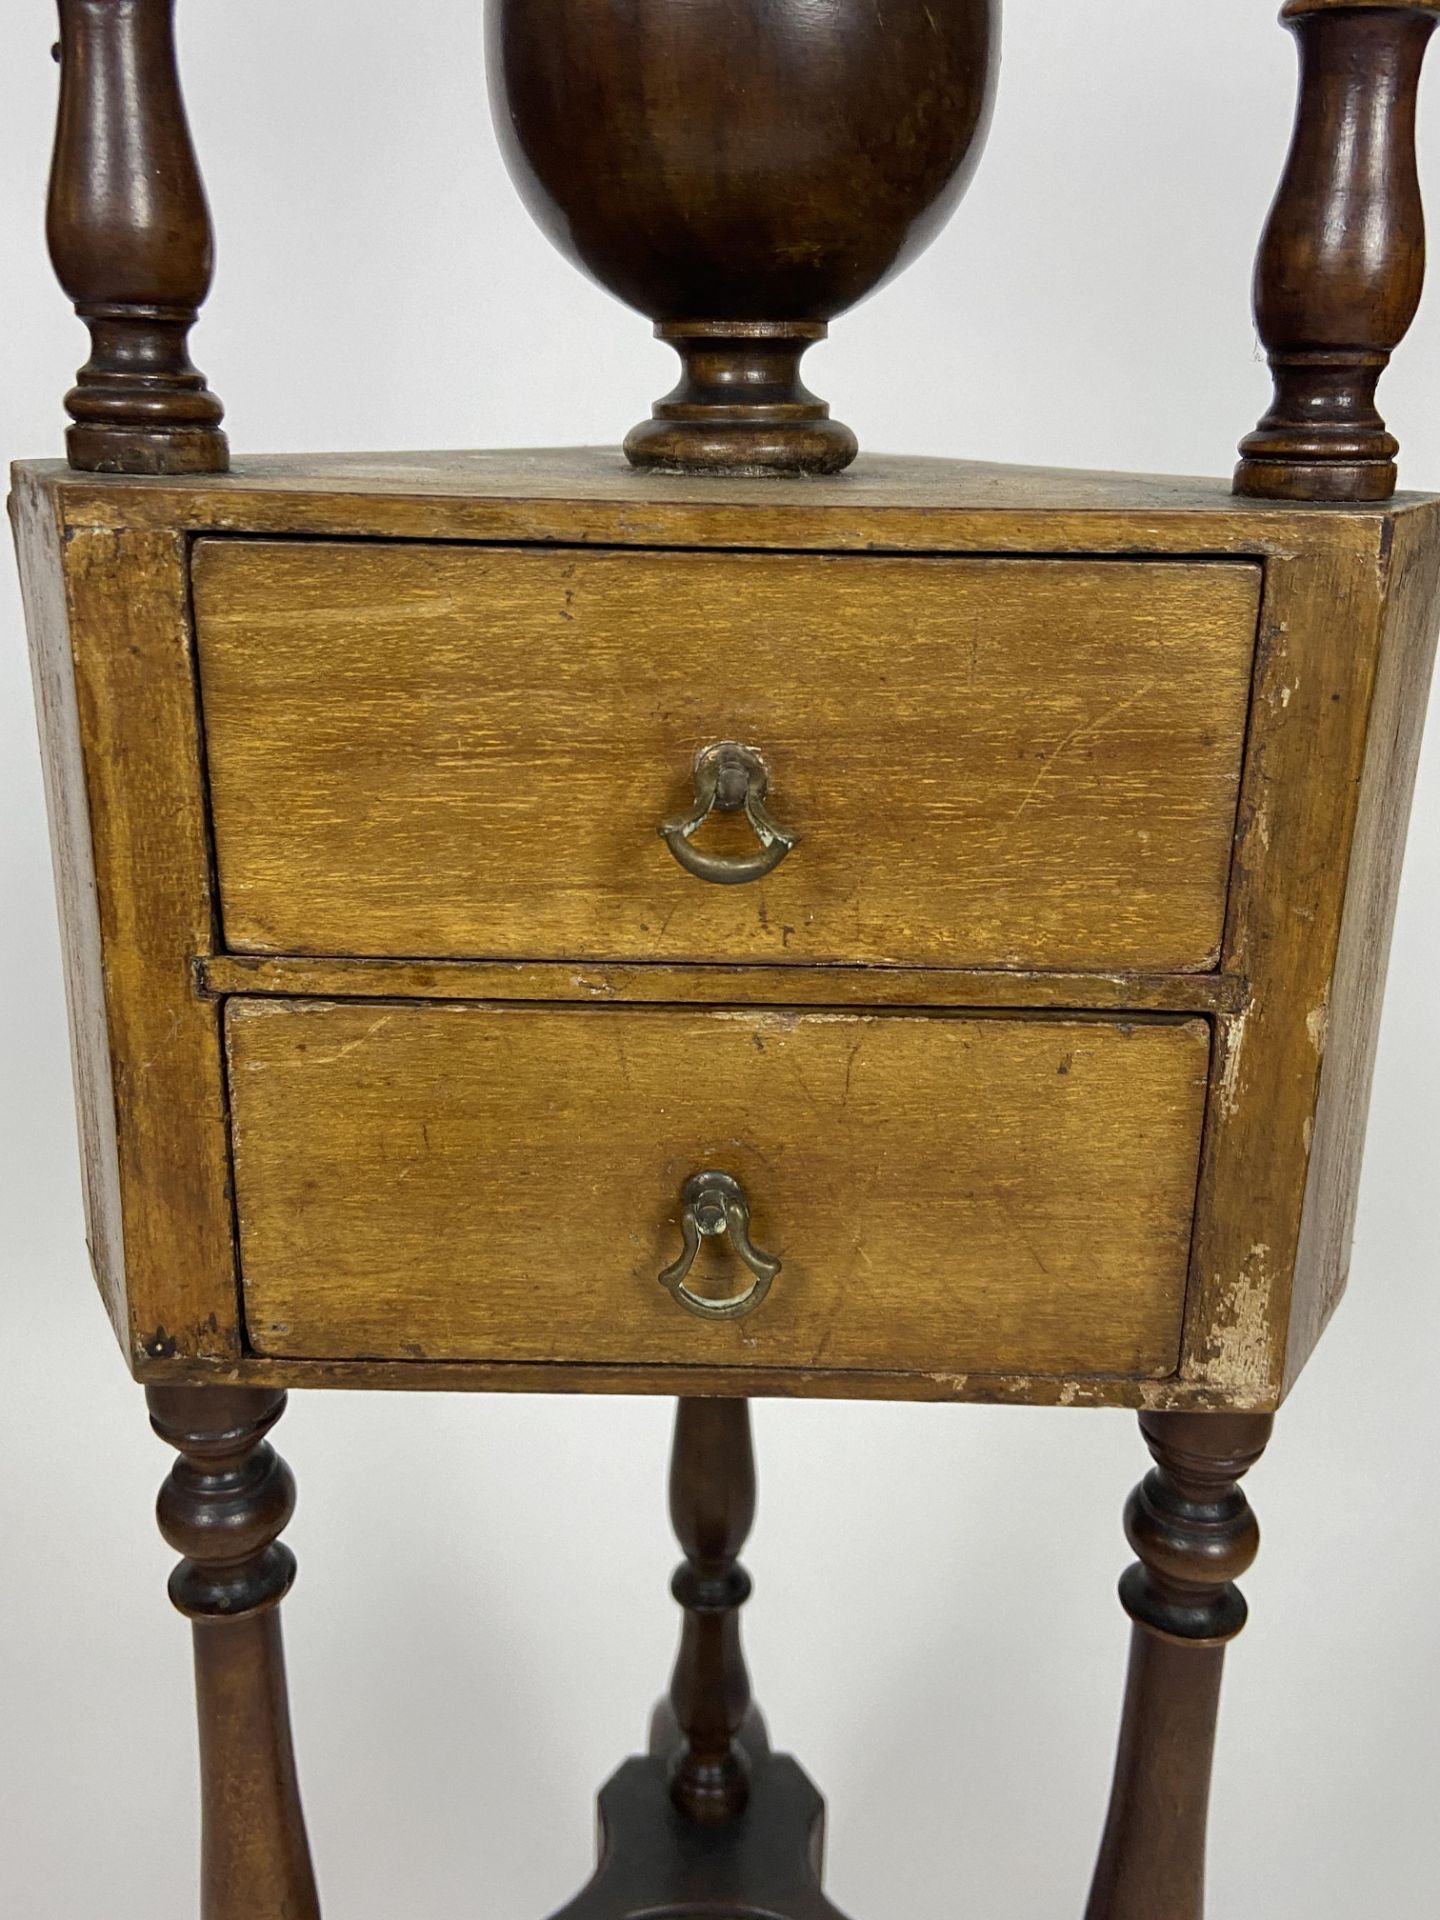 A George III style mahogany shaving stand - Image 2 of 5